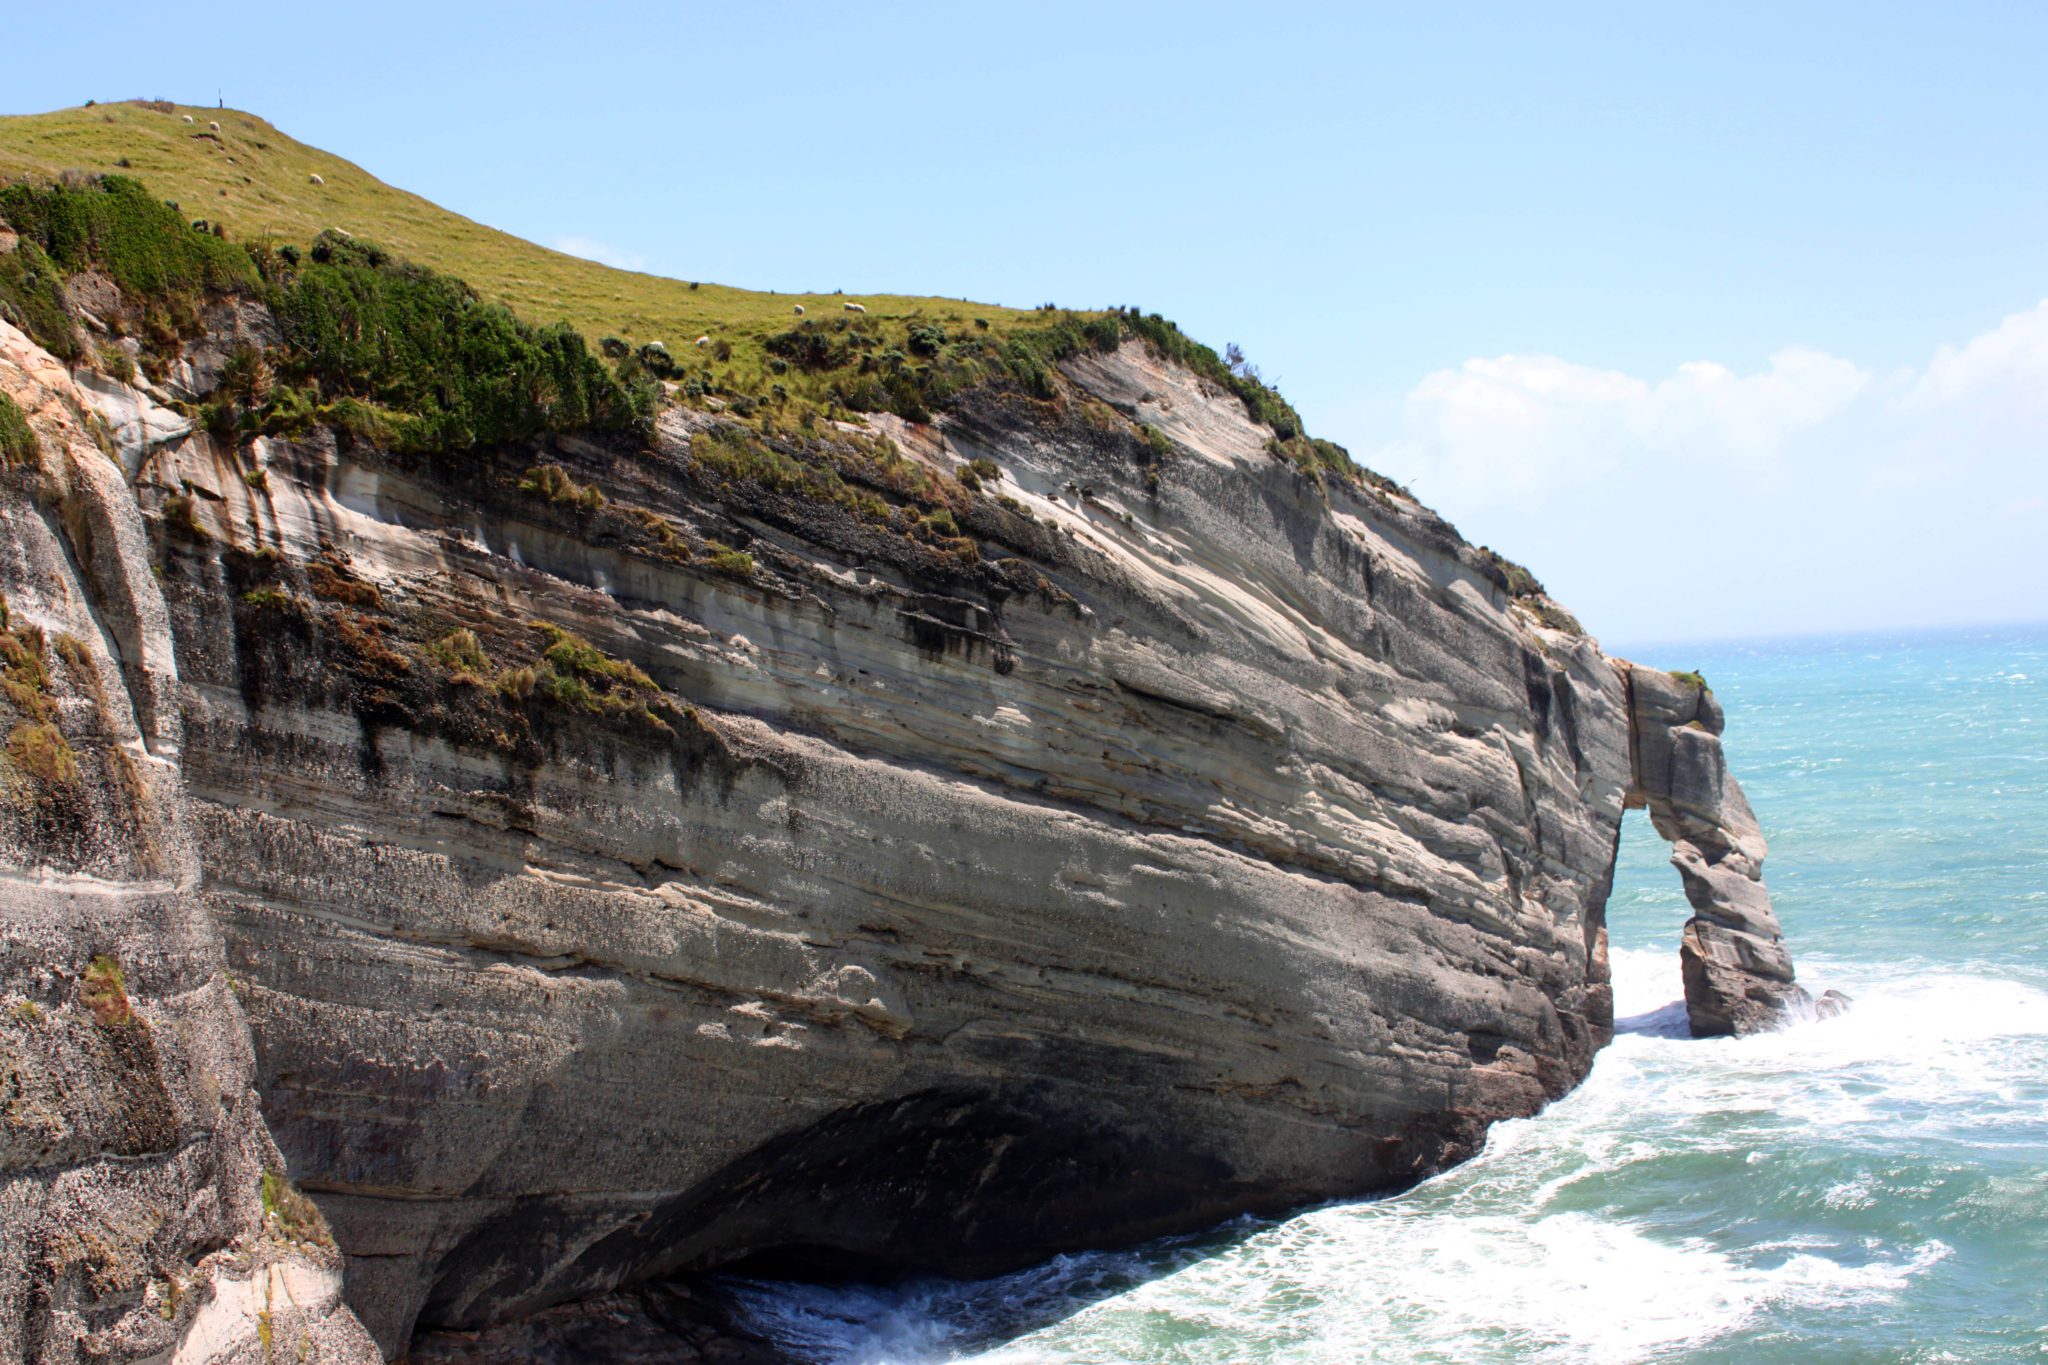 New Zealand's Cape Farewell lookout | 10 Must see locations at Golden Bay New Zealand #goldenbay #newzealand #capefarewell #simplywander